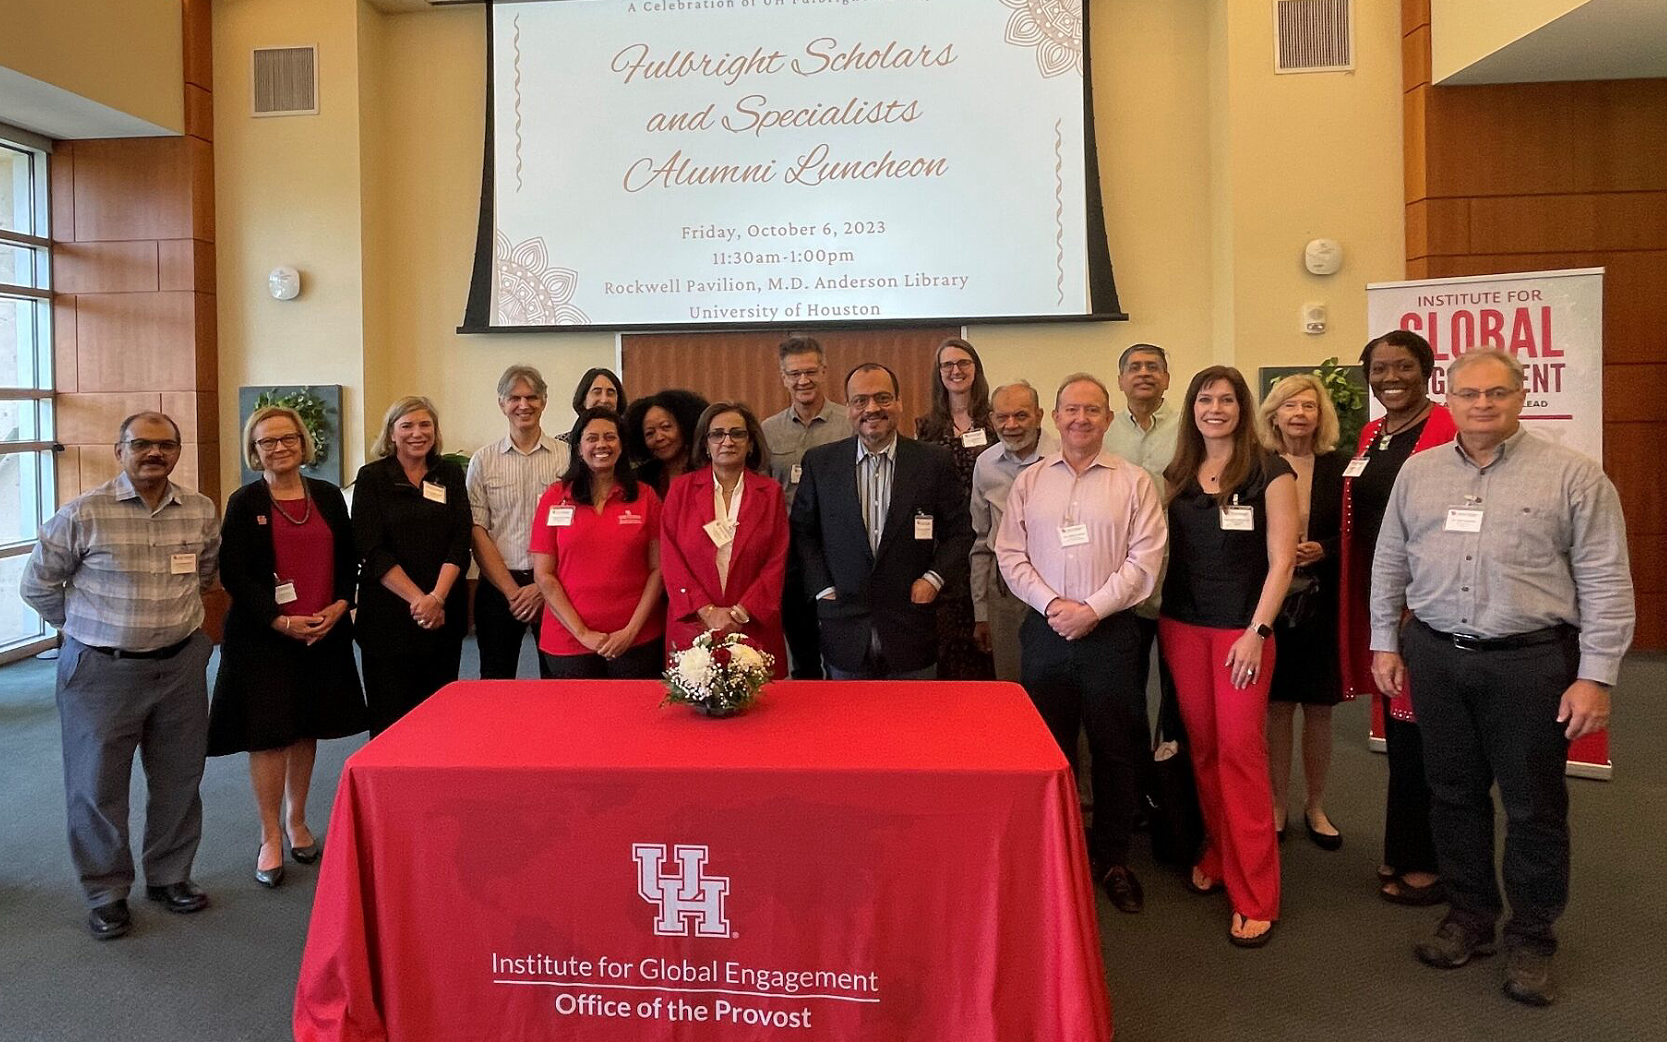 University of Houston: Creating a “Fulbright Culture” through Institutional Teamwork